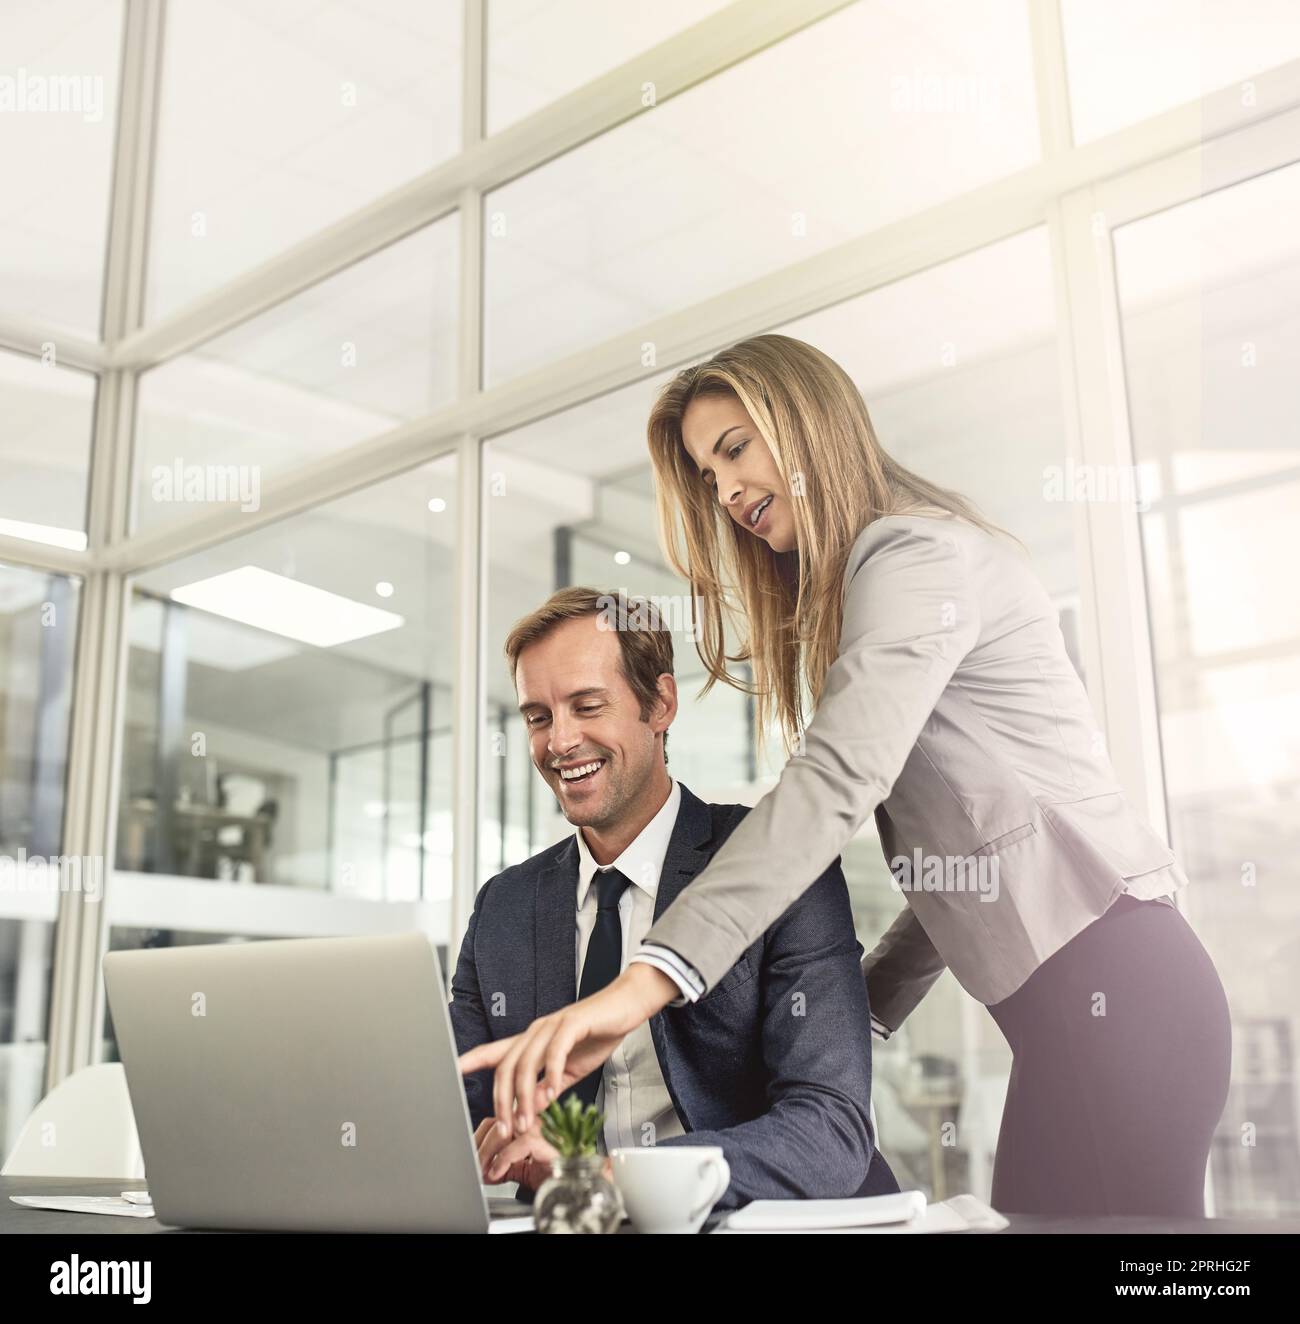 Building upon their successes. a two executives working together in an office. Stock Photo